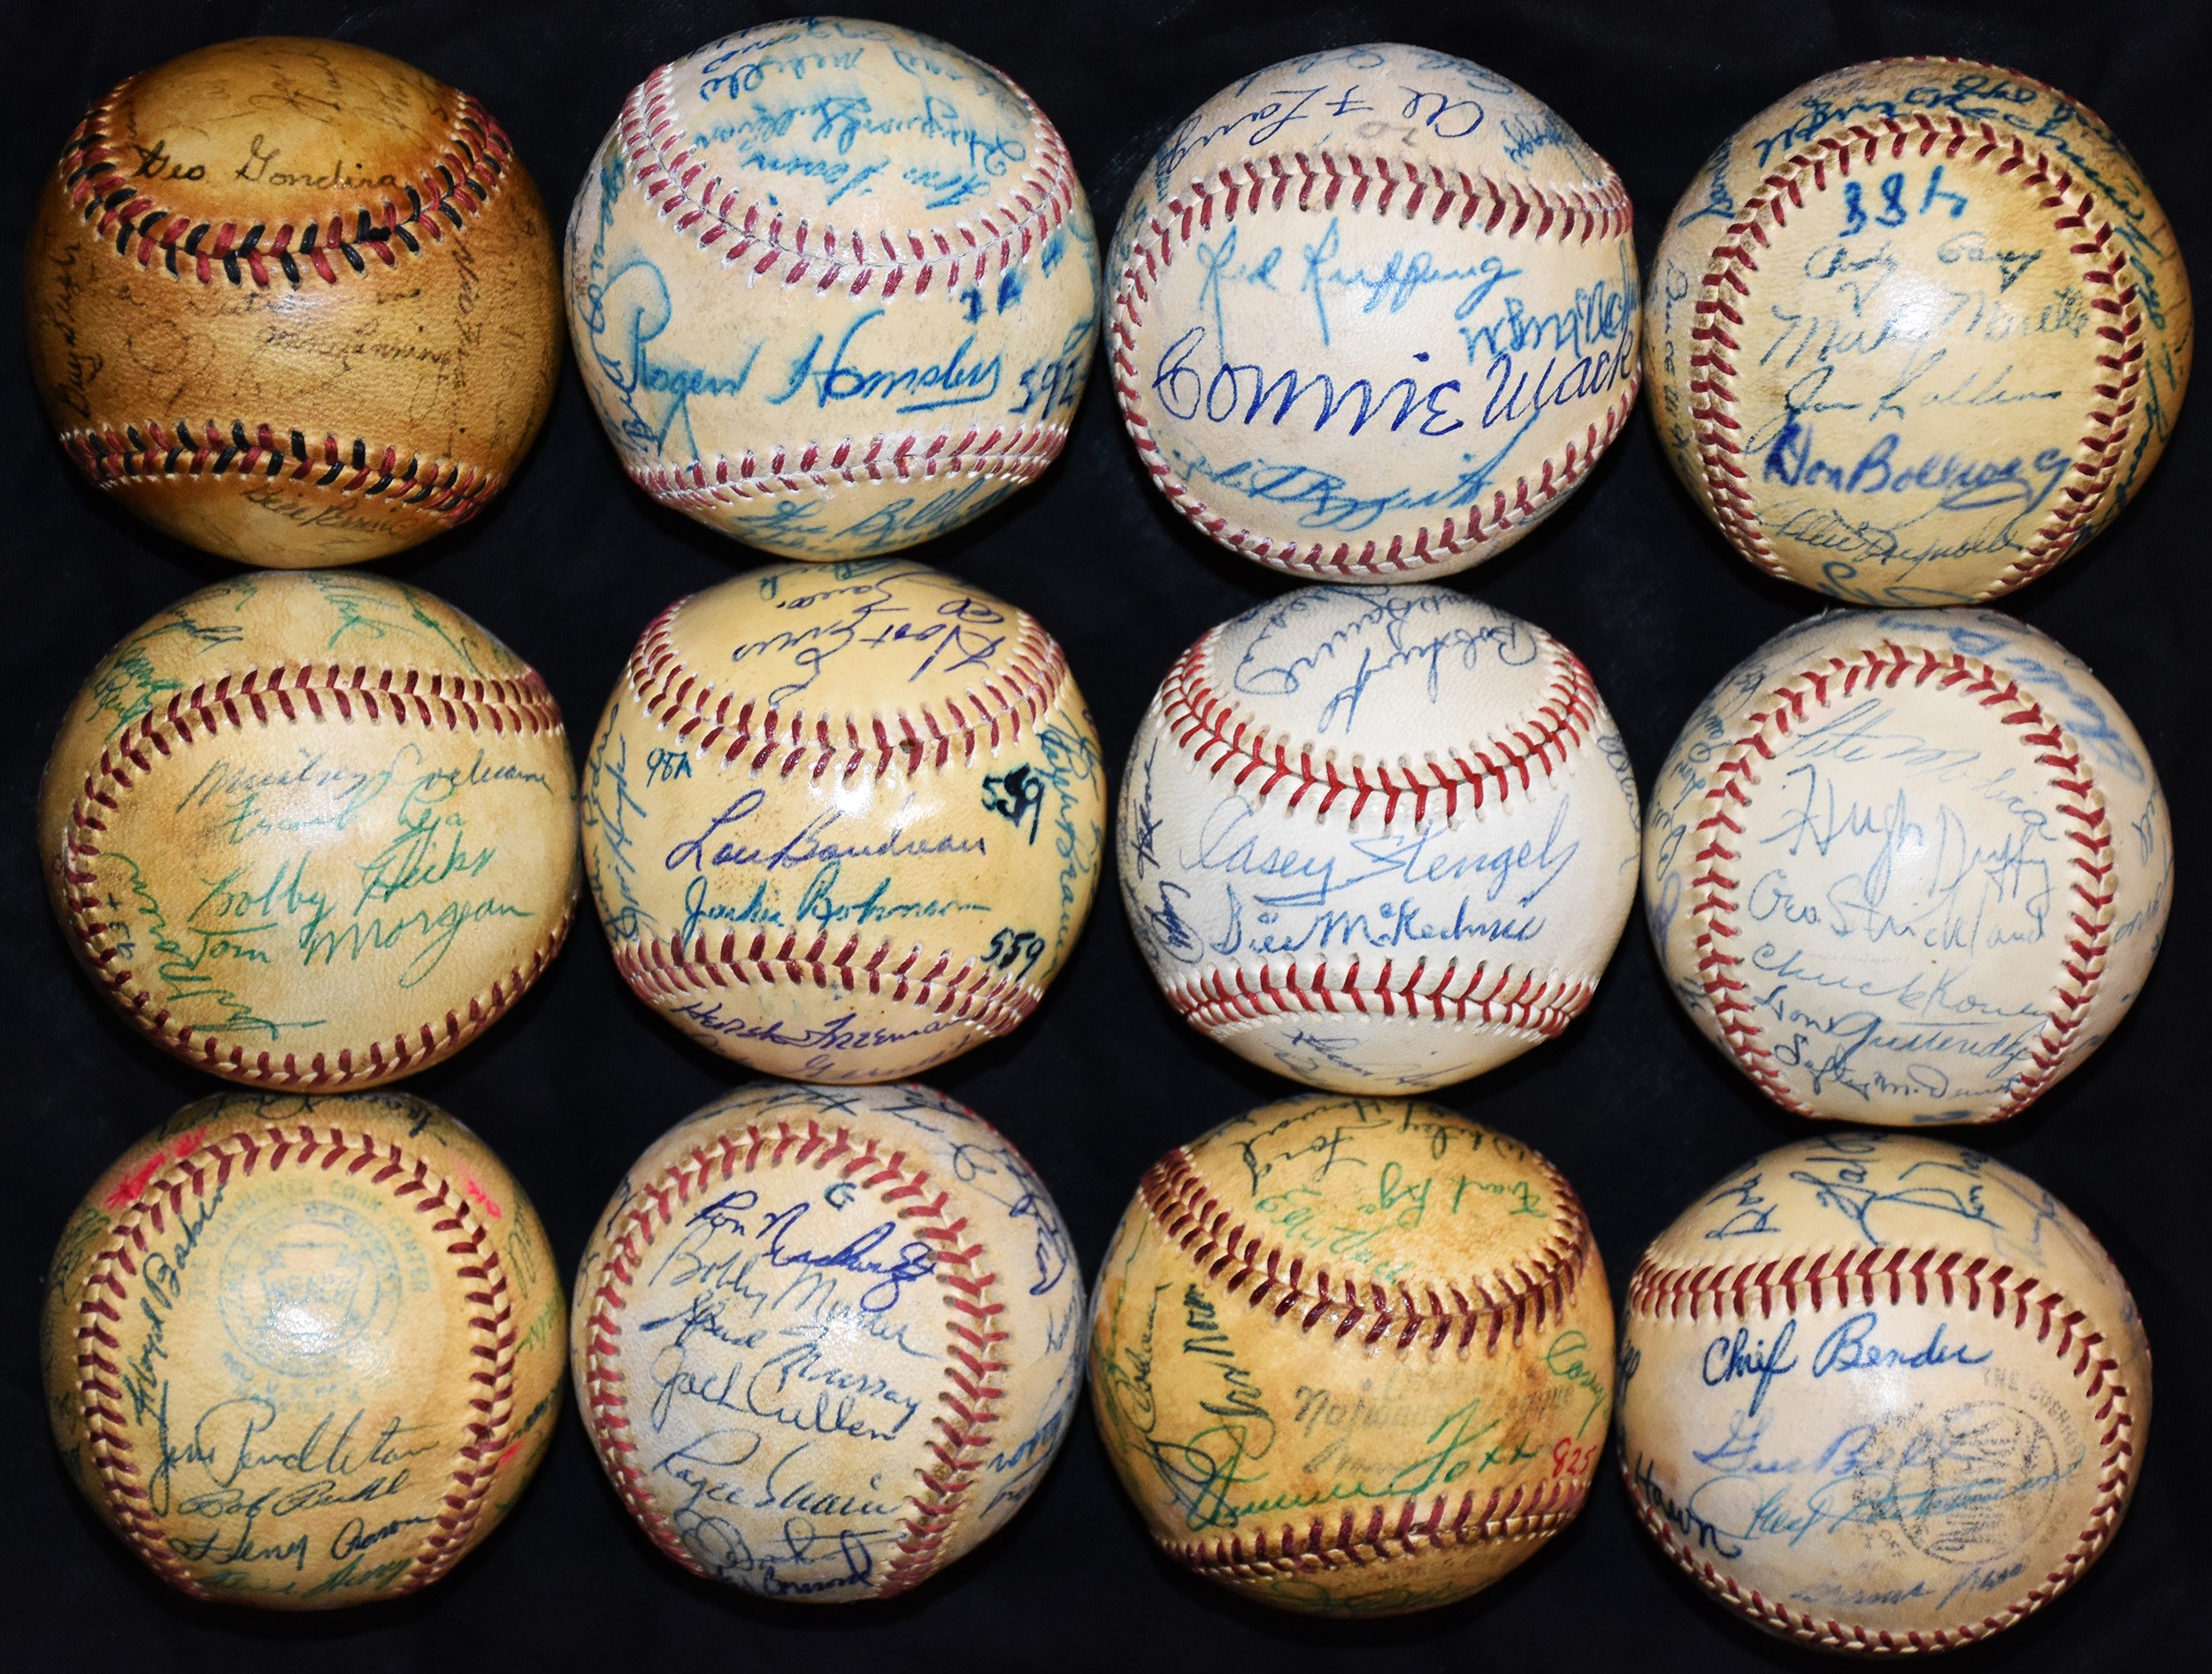 The John O'connor Signed Baseball Collection - Incredible 1930s-60s Hall of Fame & Team-Signed Baseball Collection w/Gehrig, Foxx, Hornsby & Robinson (45+)